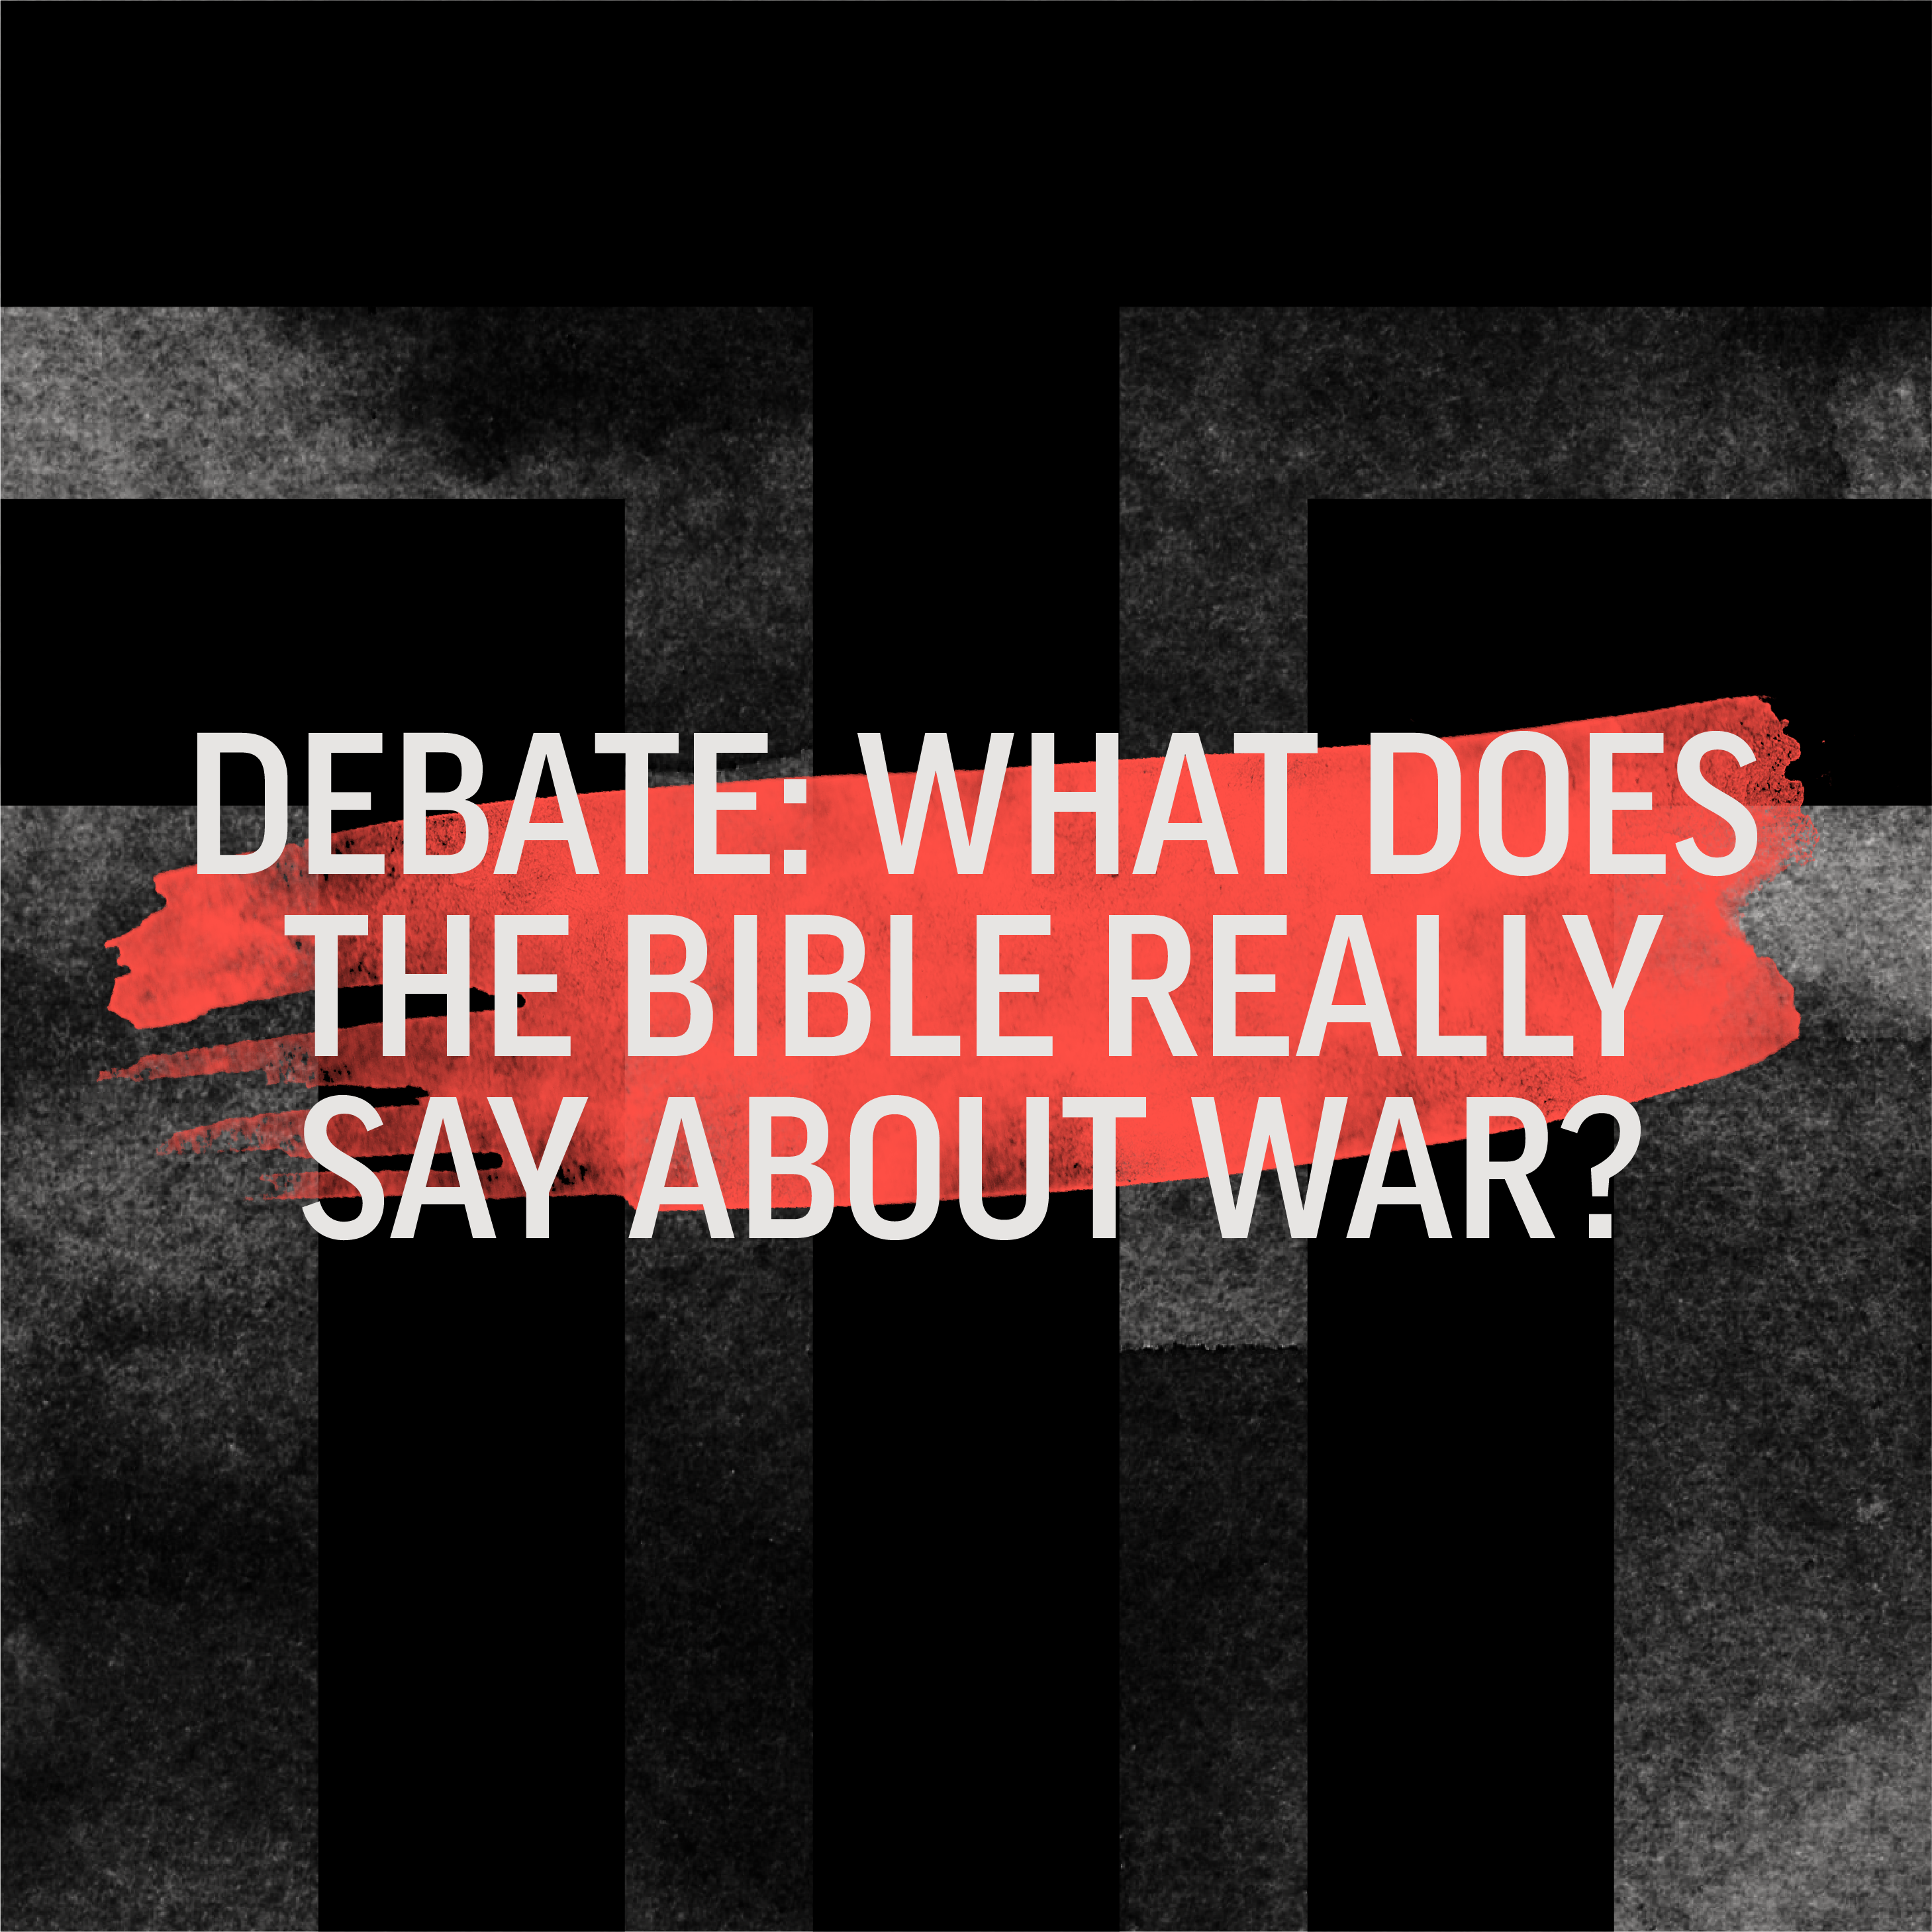 DEBATE: What Does the Bible REALLY Say About War?